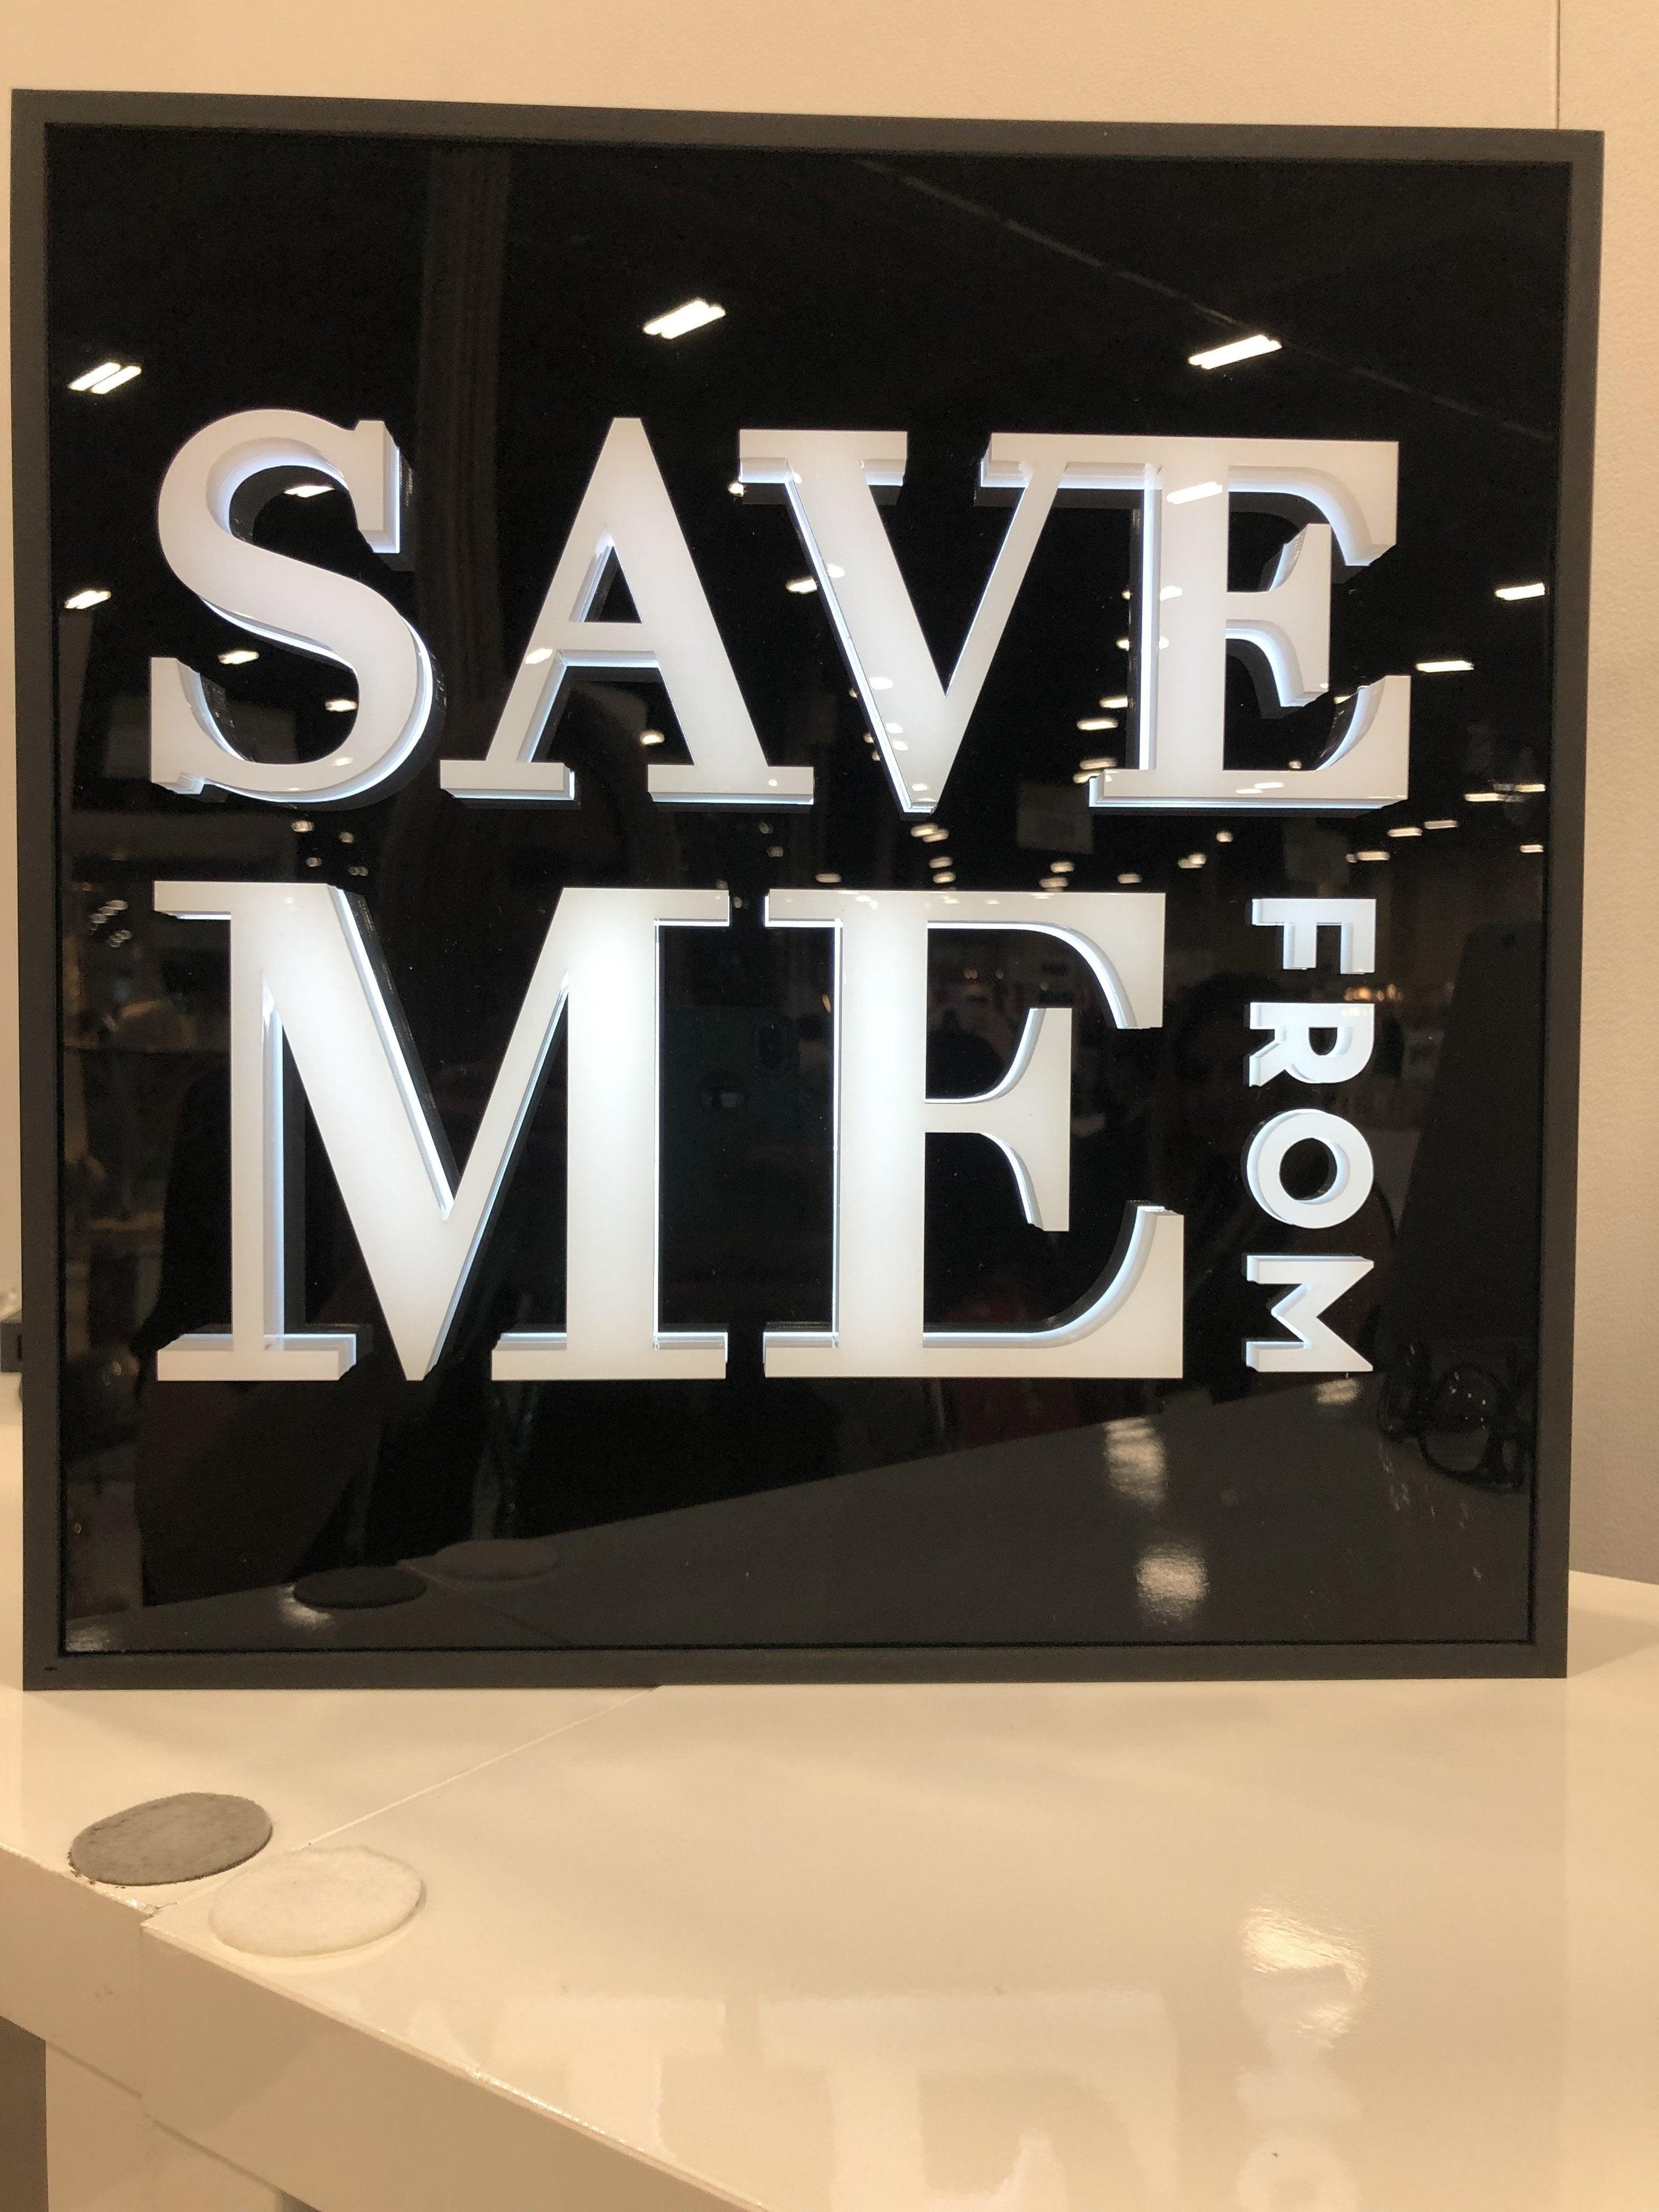 SAVE ME FROM at Cosmoprof North America 2019 - SAVE ME FROM